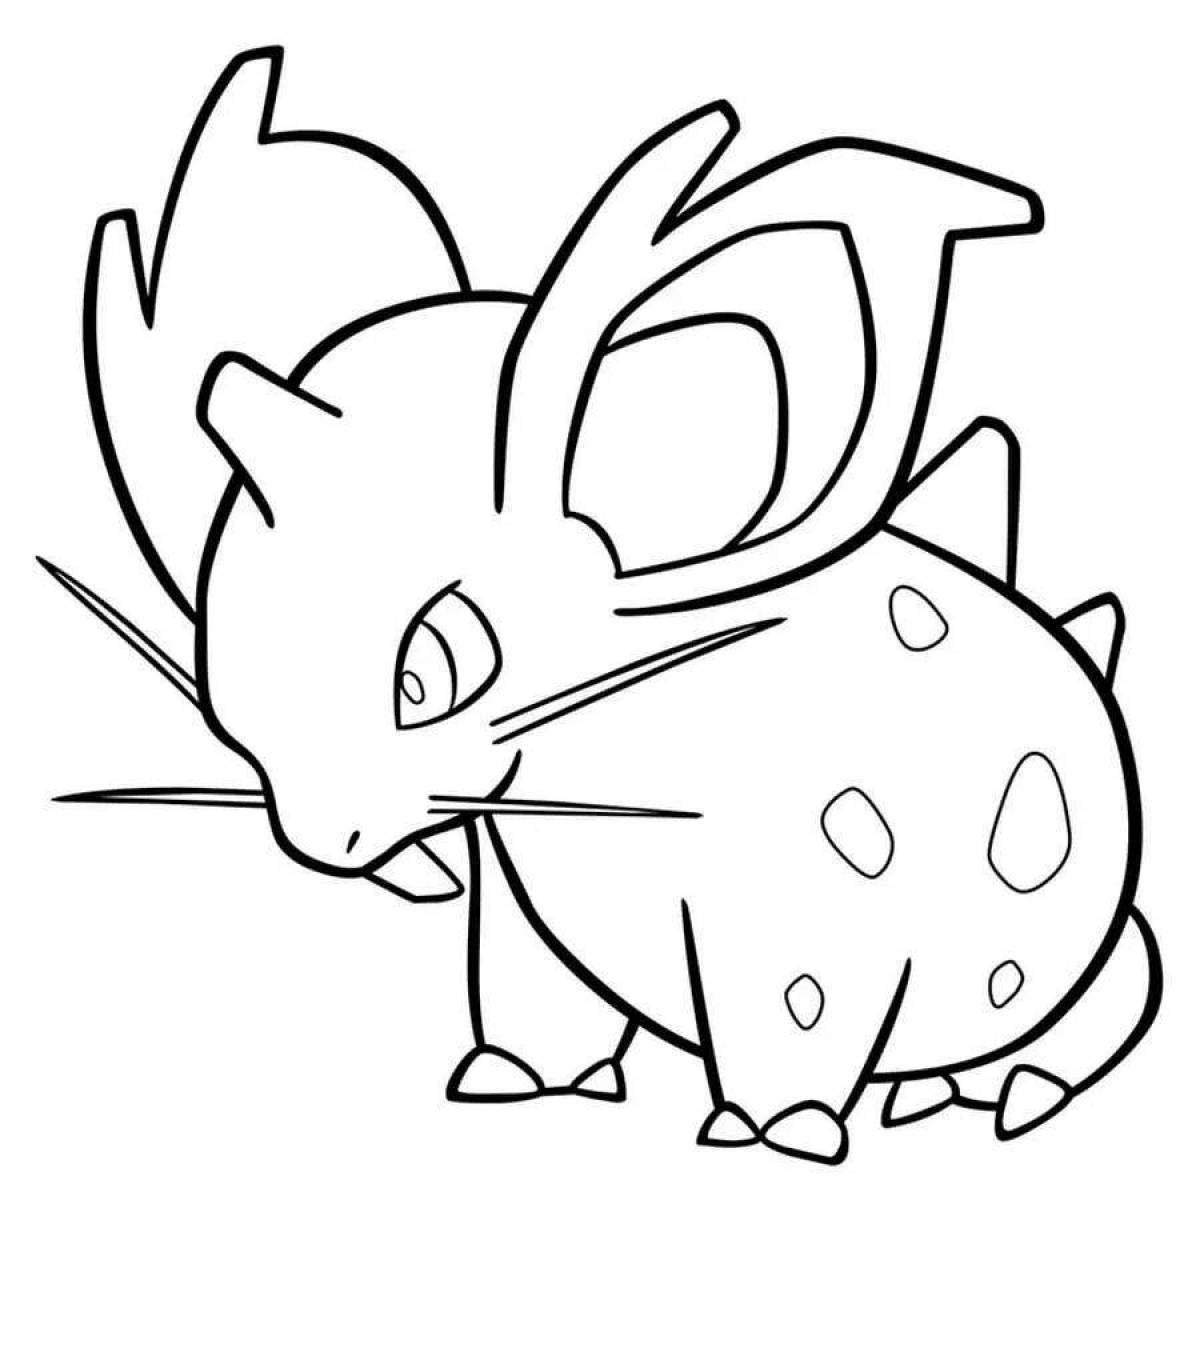 Updated good quality pokemon coloring page